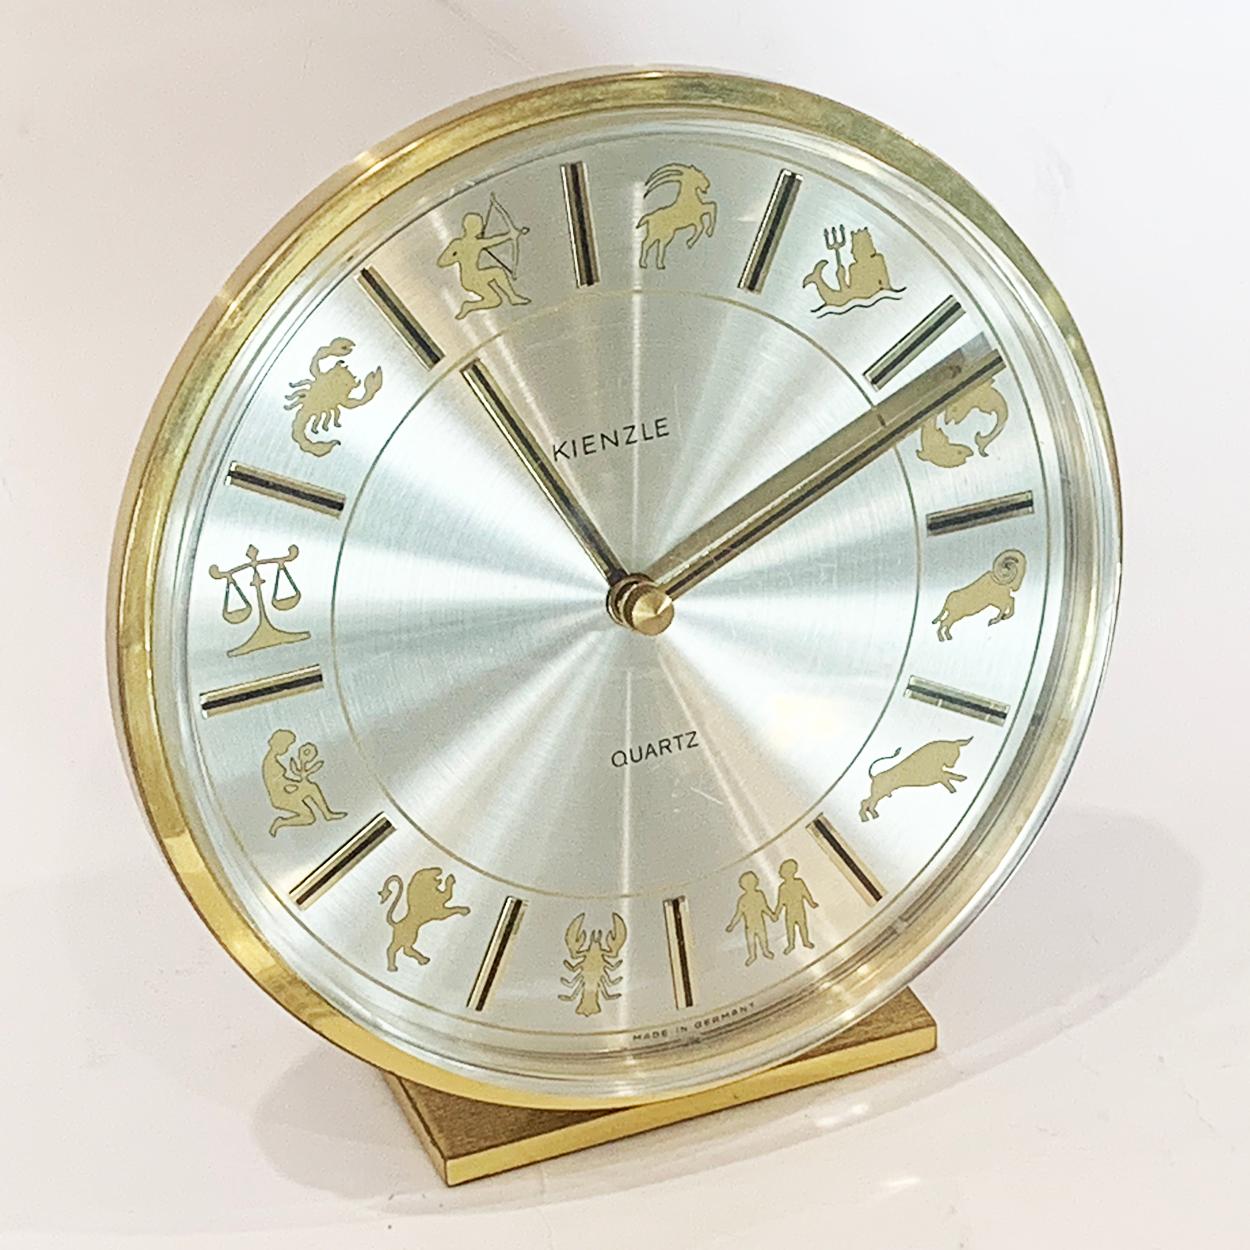 Mid Century, circa 1960, German Clock by Kienzle, with  Zodiac Signs in satin Gilt to face of satin silver face having every 5 minutes with Batons of bright Gilt with a central black stripe, matching the Hour and Minute Hands.
It has very intricate,